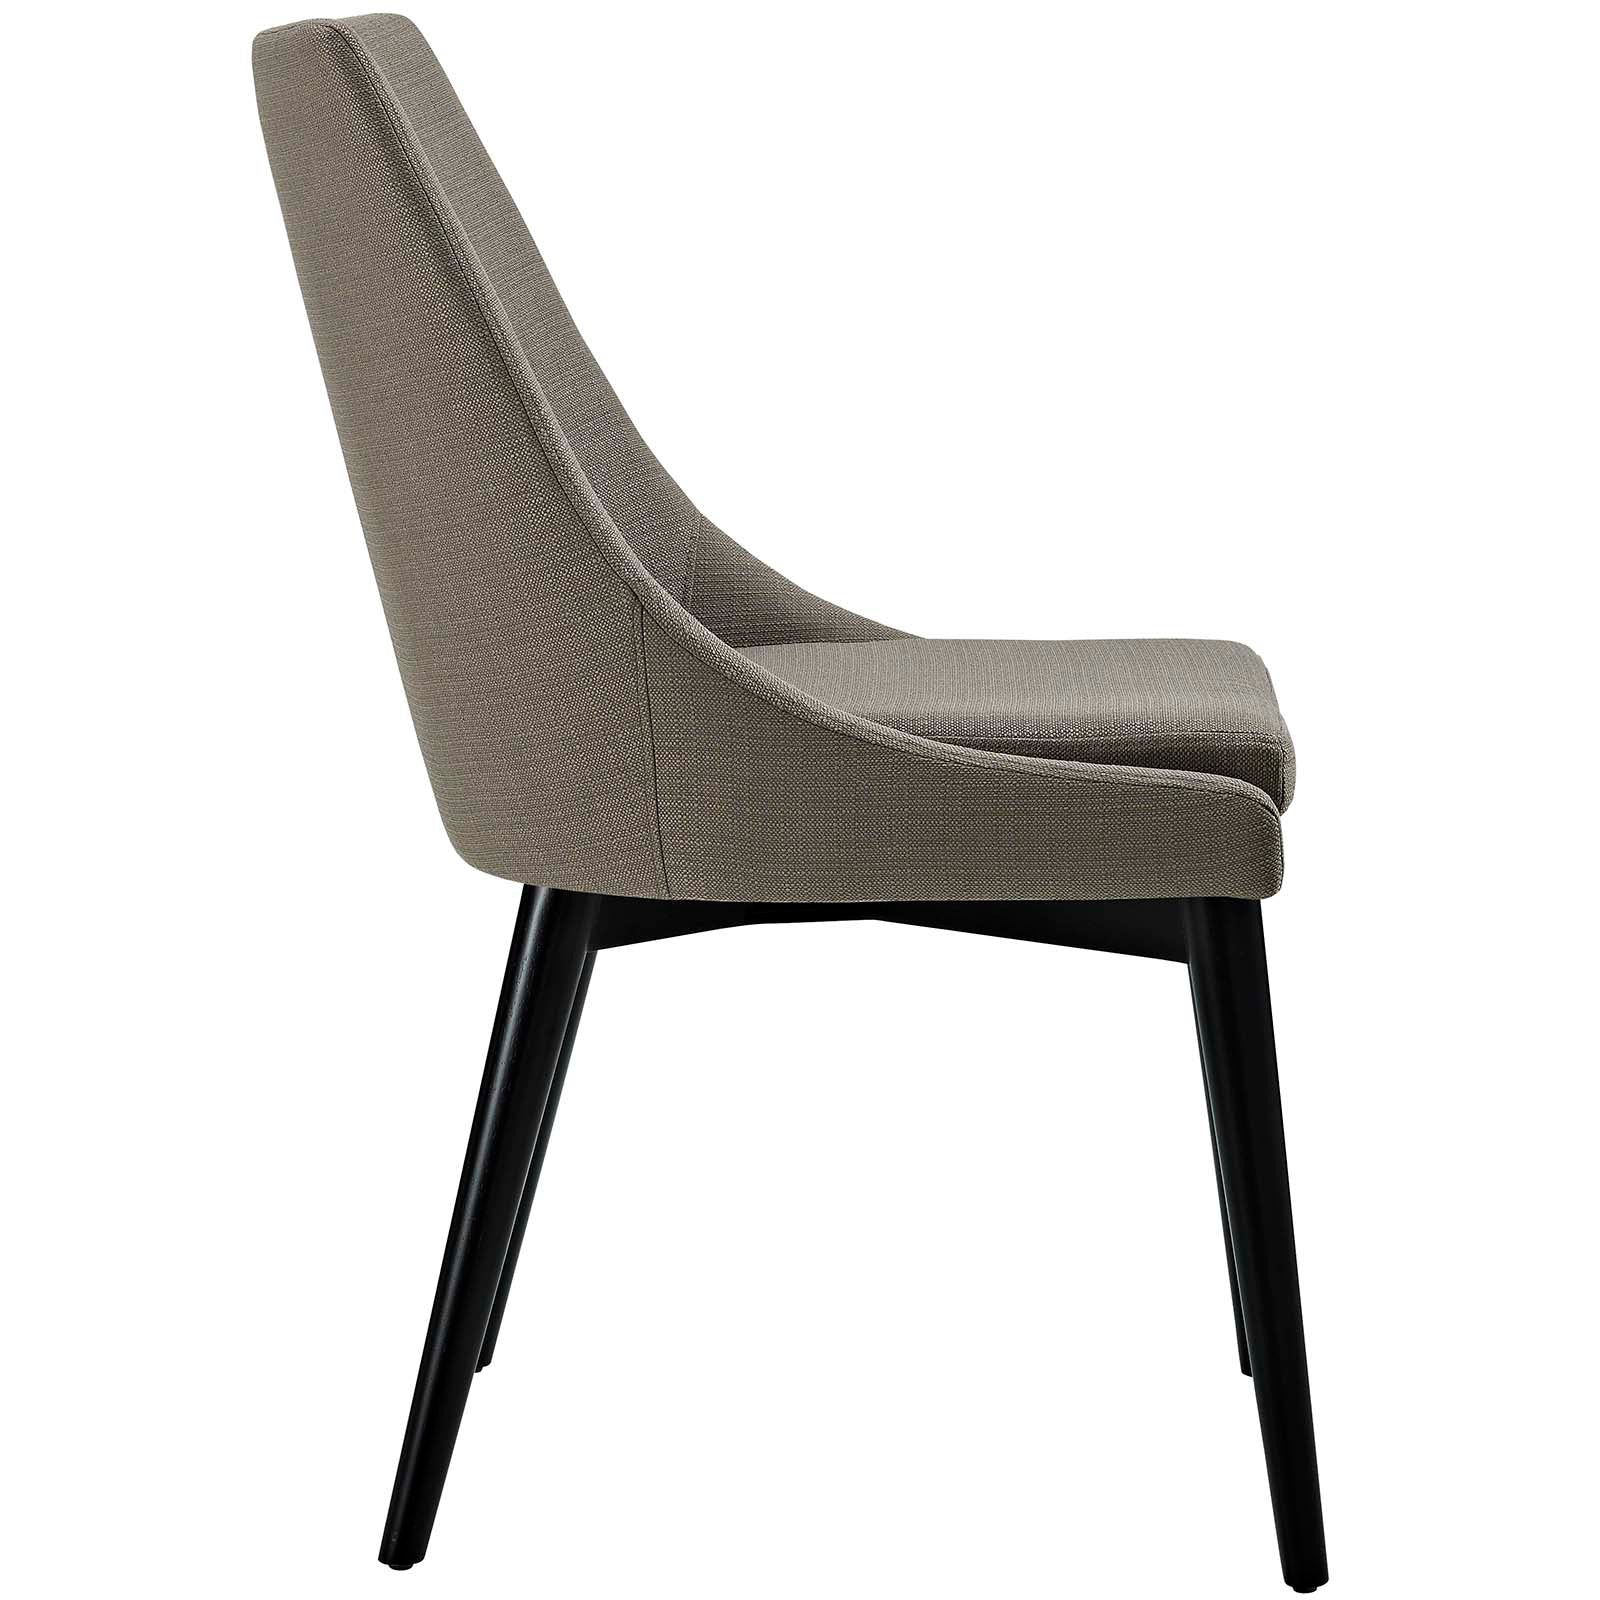 Modway Dining Chairs - Viscount Fabric Dining Chair Granite